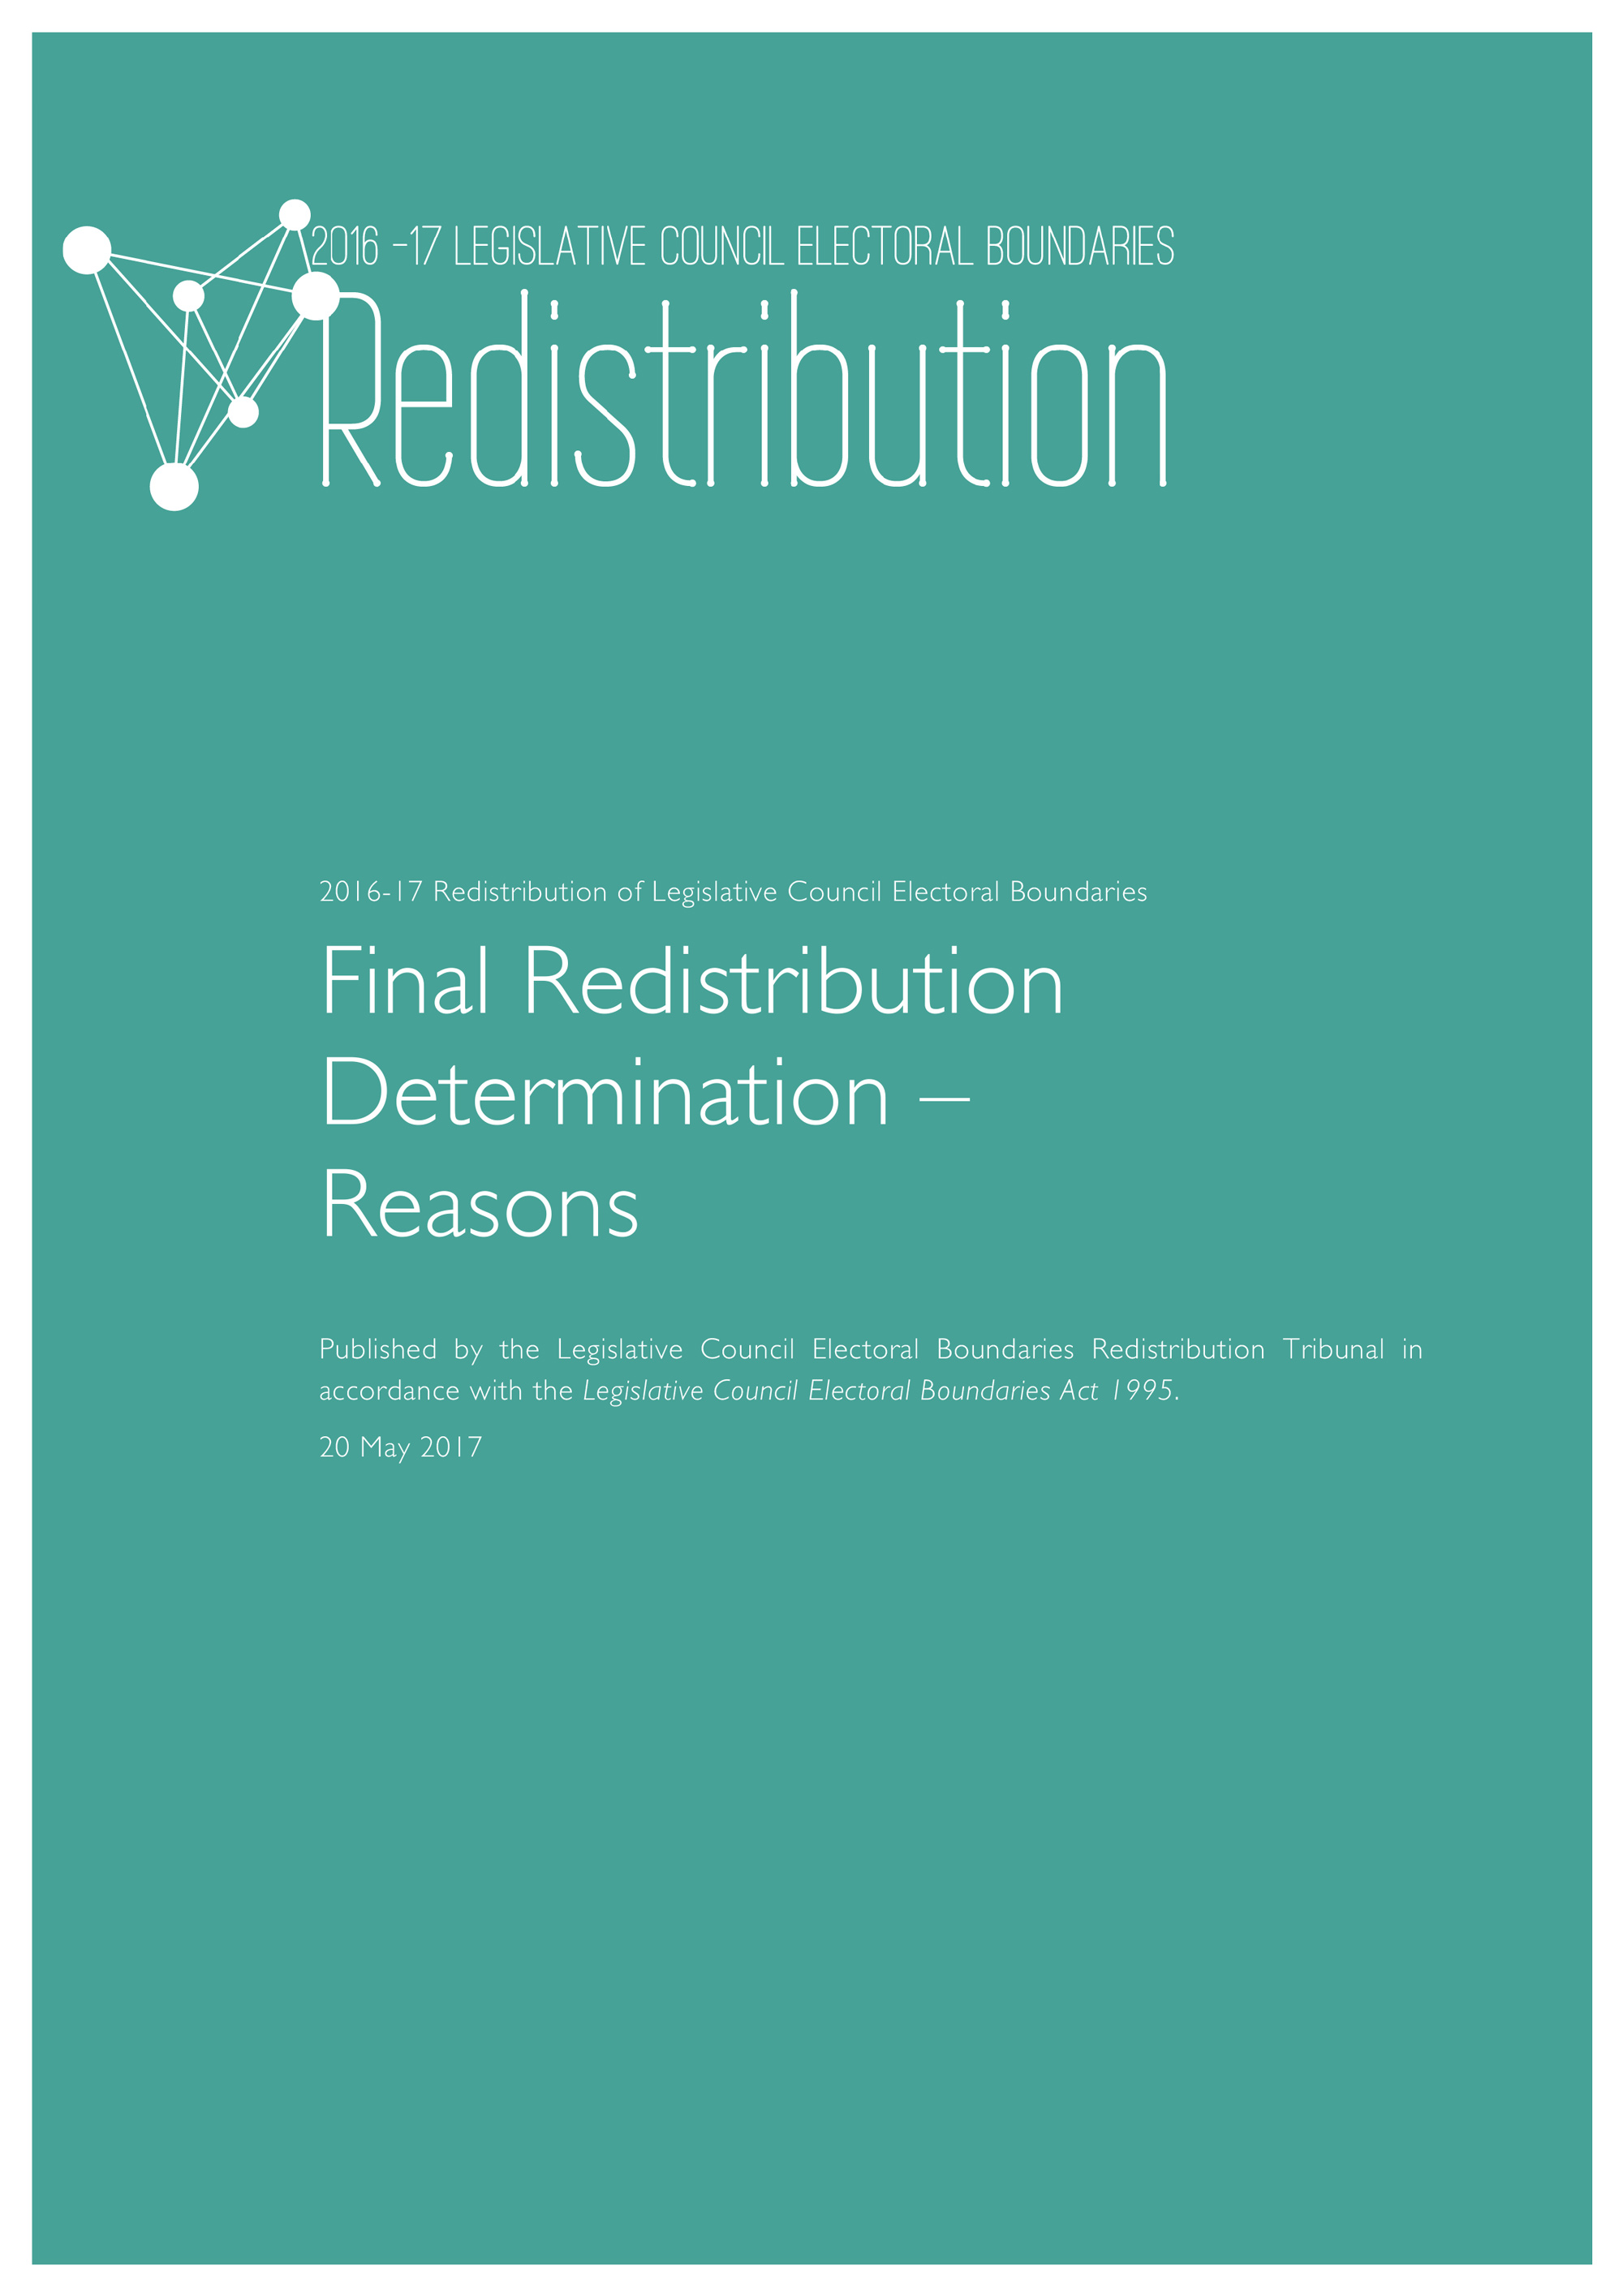 Image of Final Redistribution Determination - Reasons booklet cover